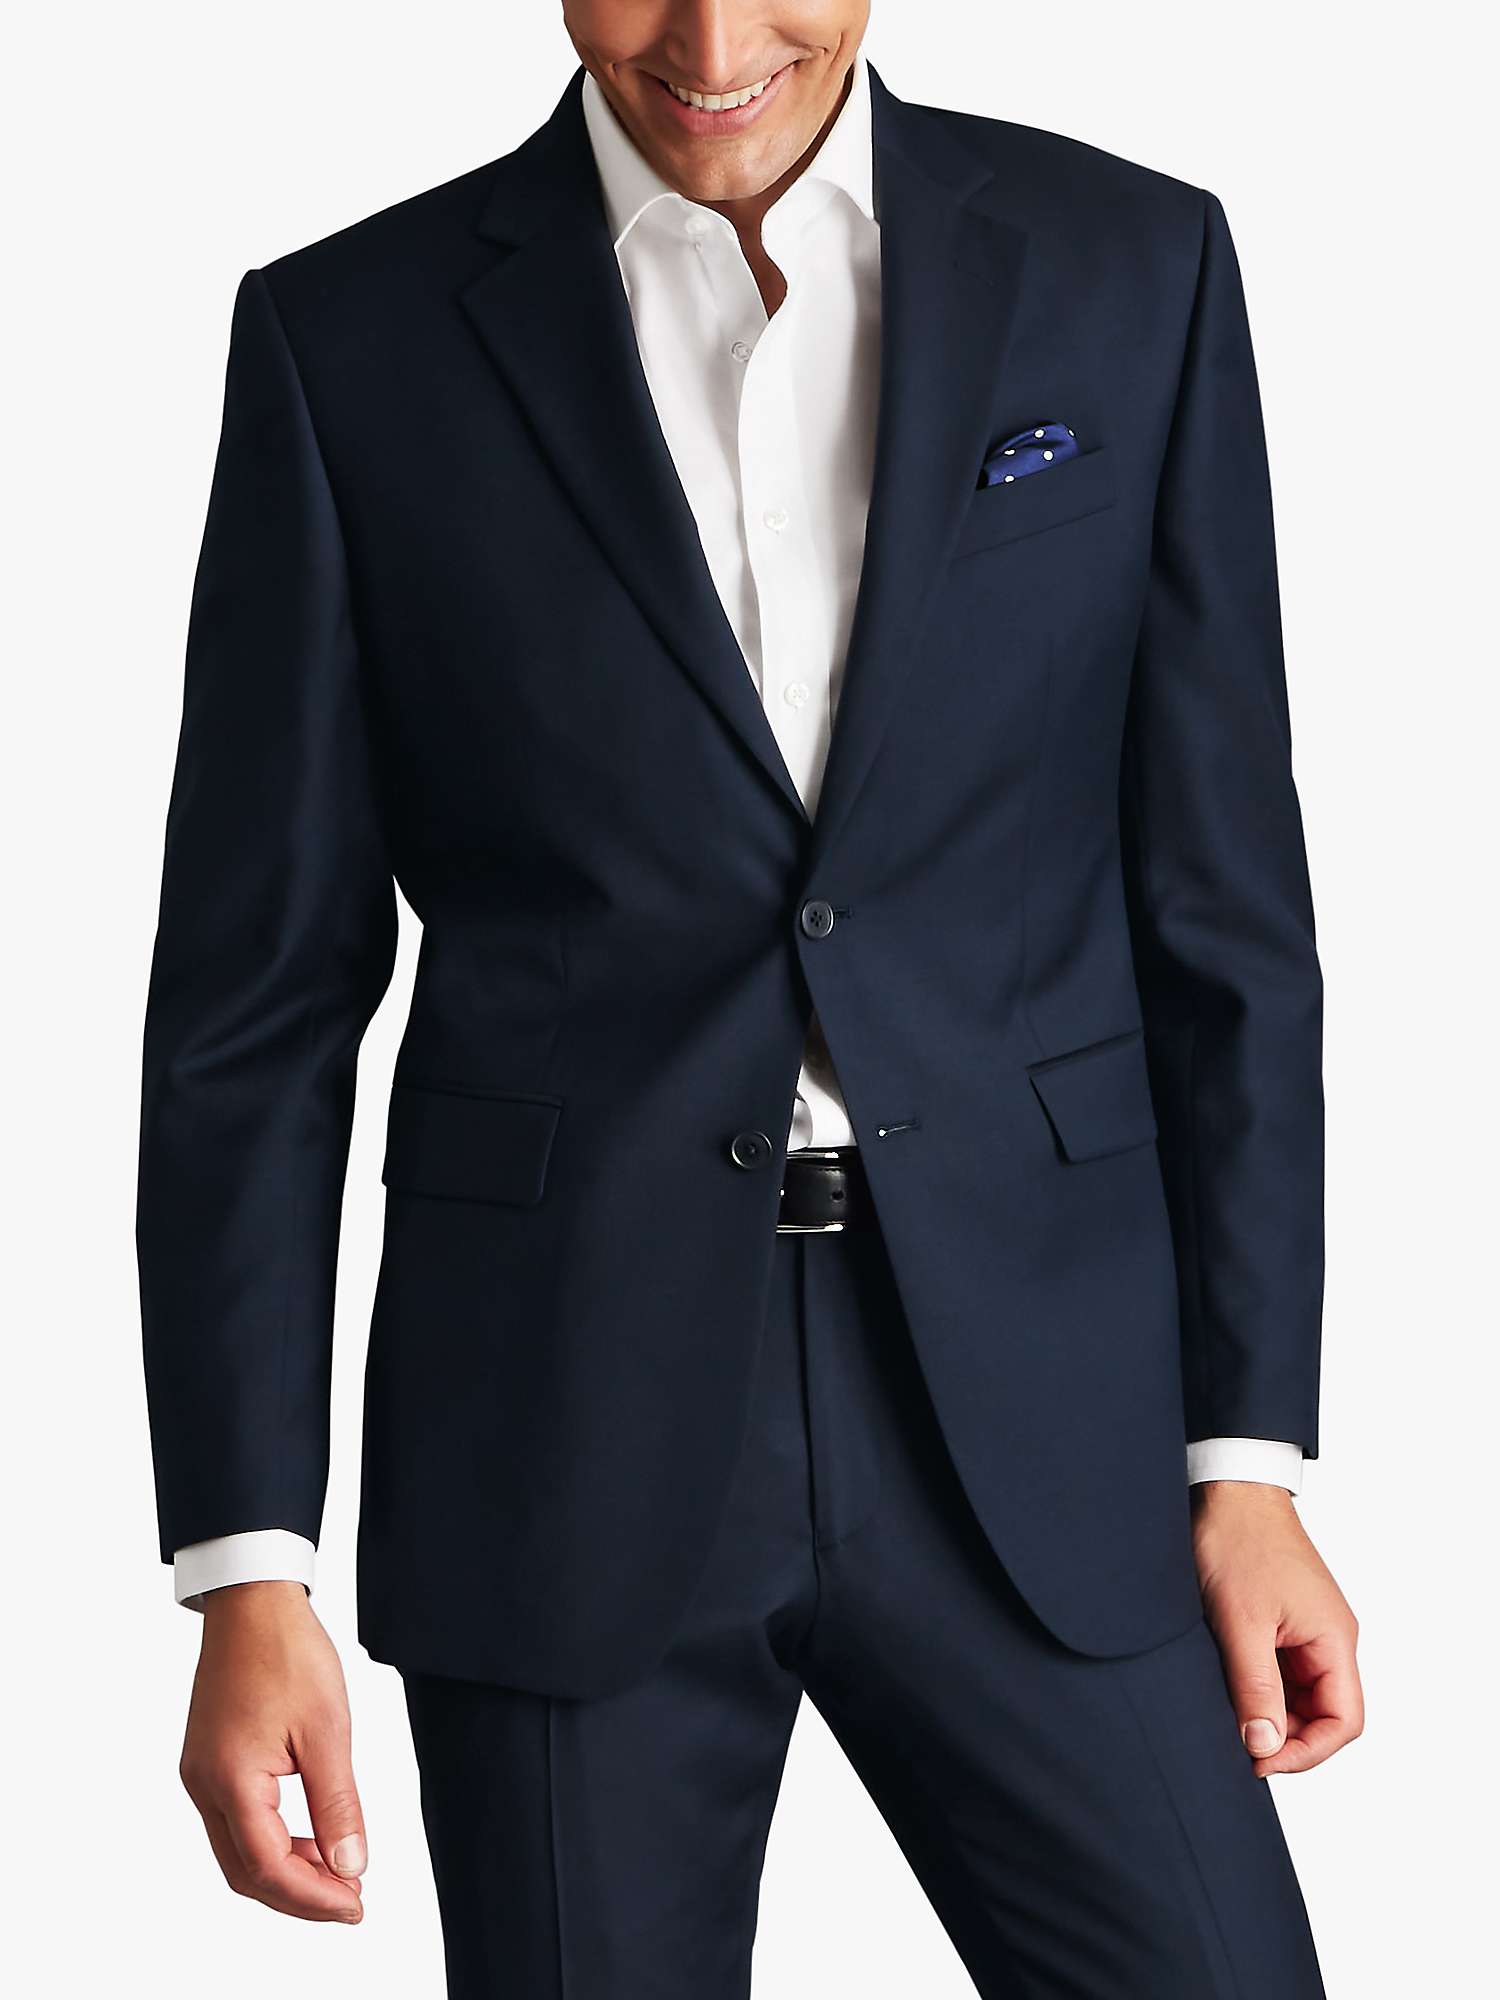 Buy Charles Tyrwhitt Natural Stretch Twill Suit Jacket Online at johnlewis.com